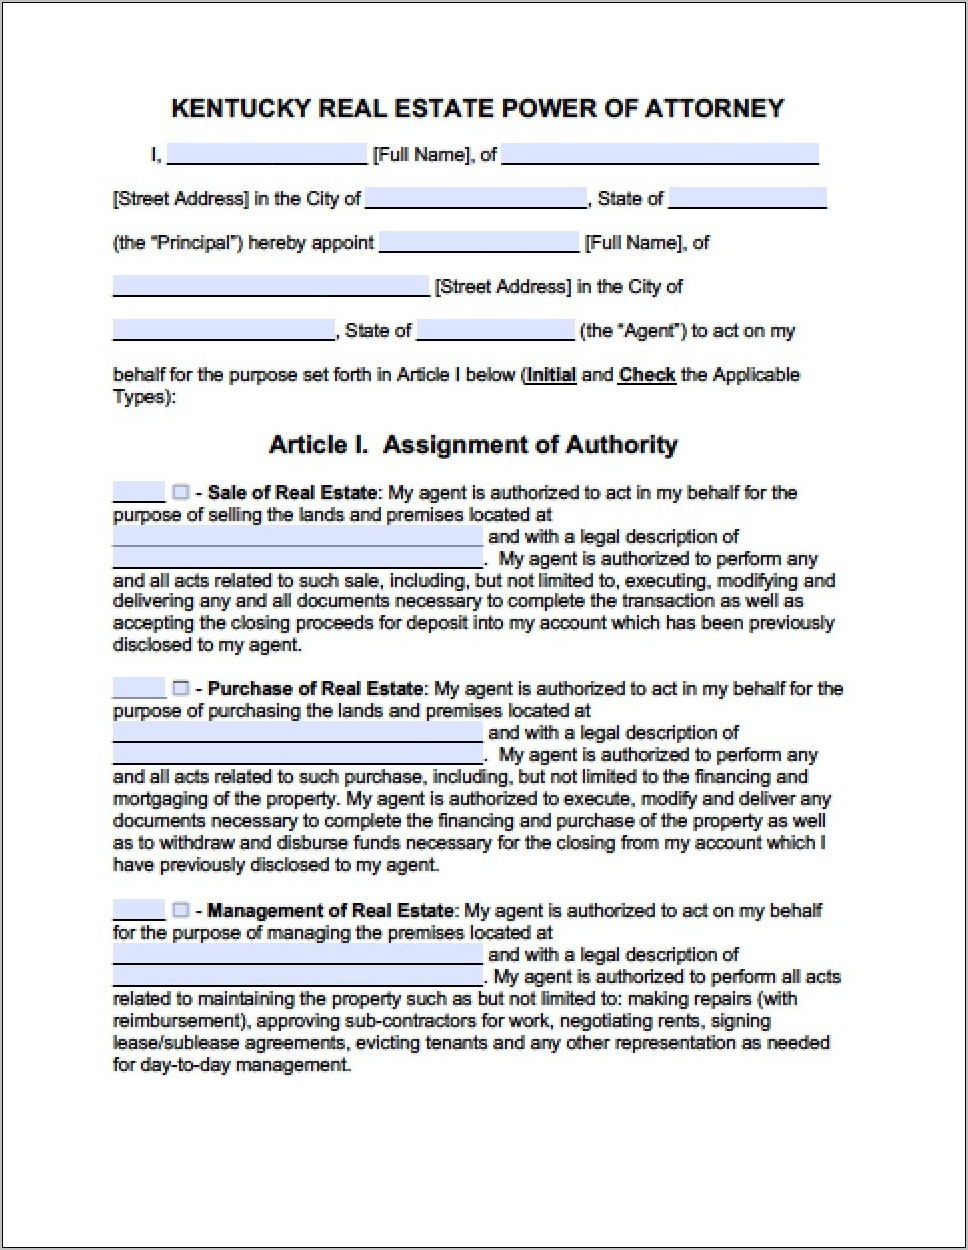 Power Of Attorney Legal Document Templates